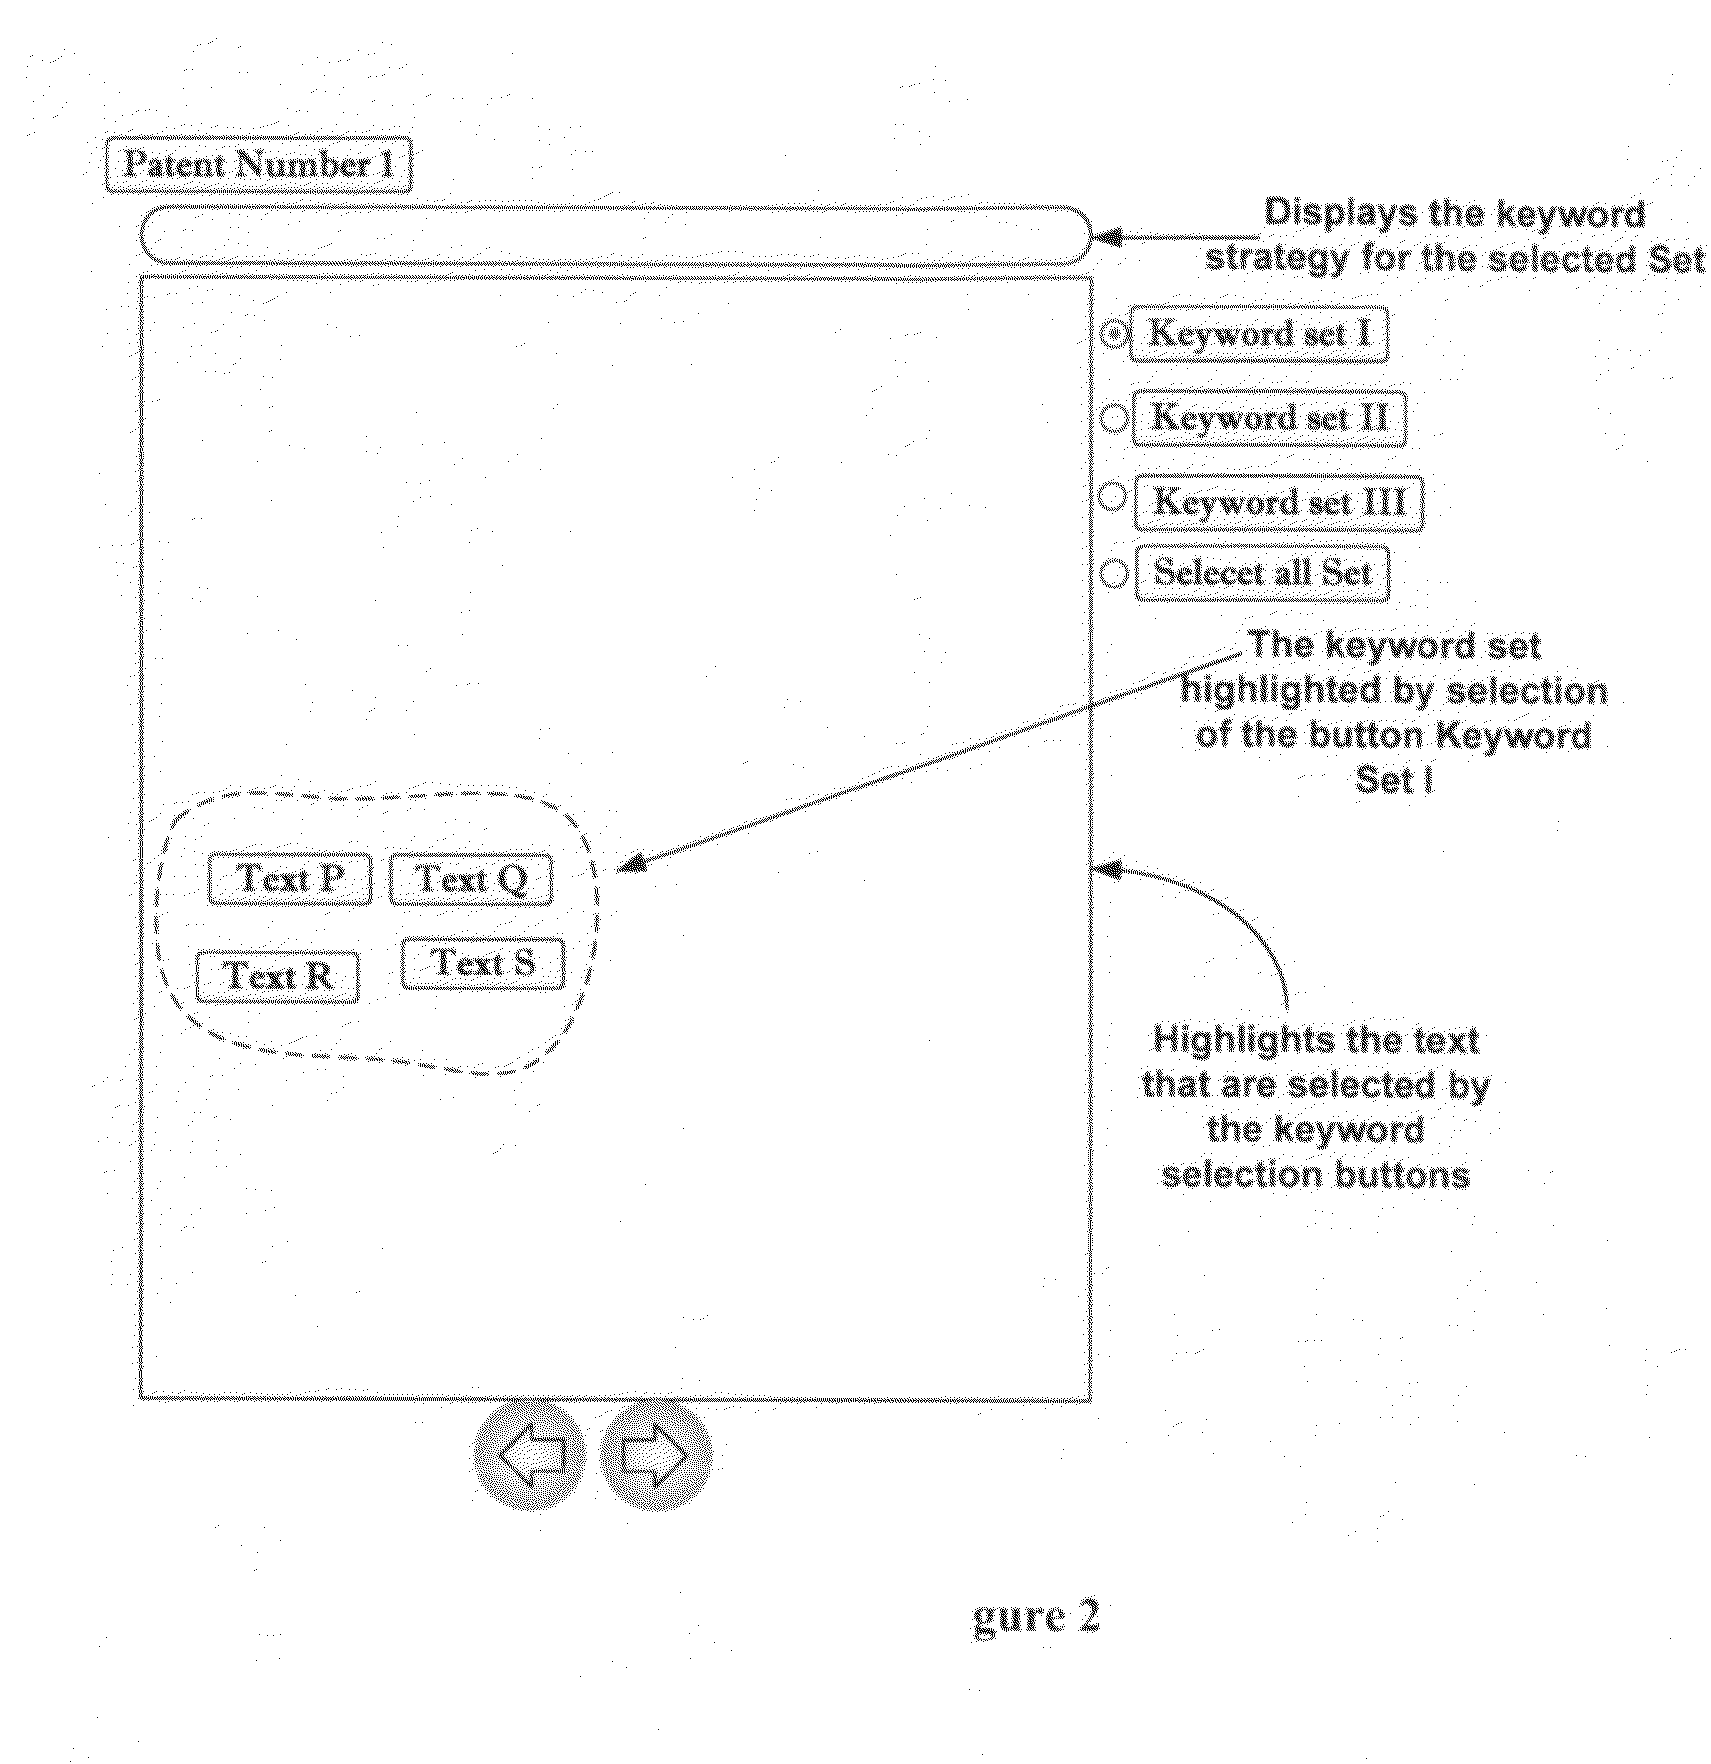 Method for advanced patent search and analysis